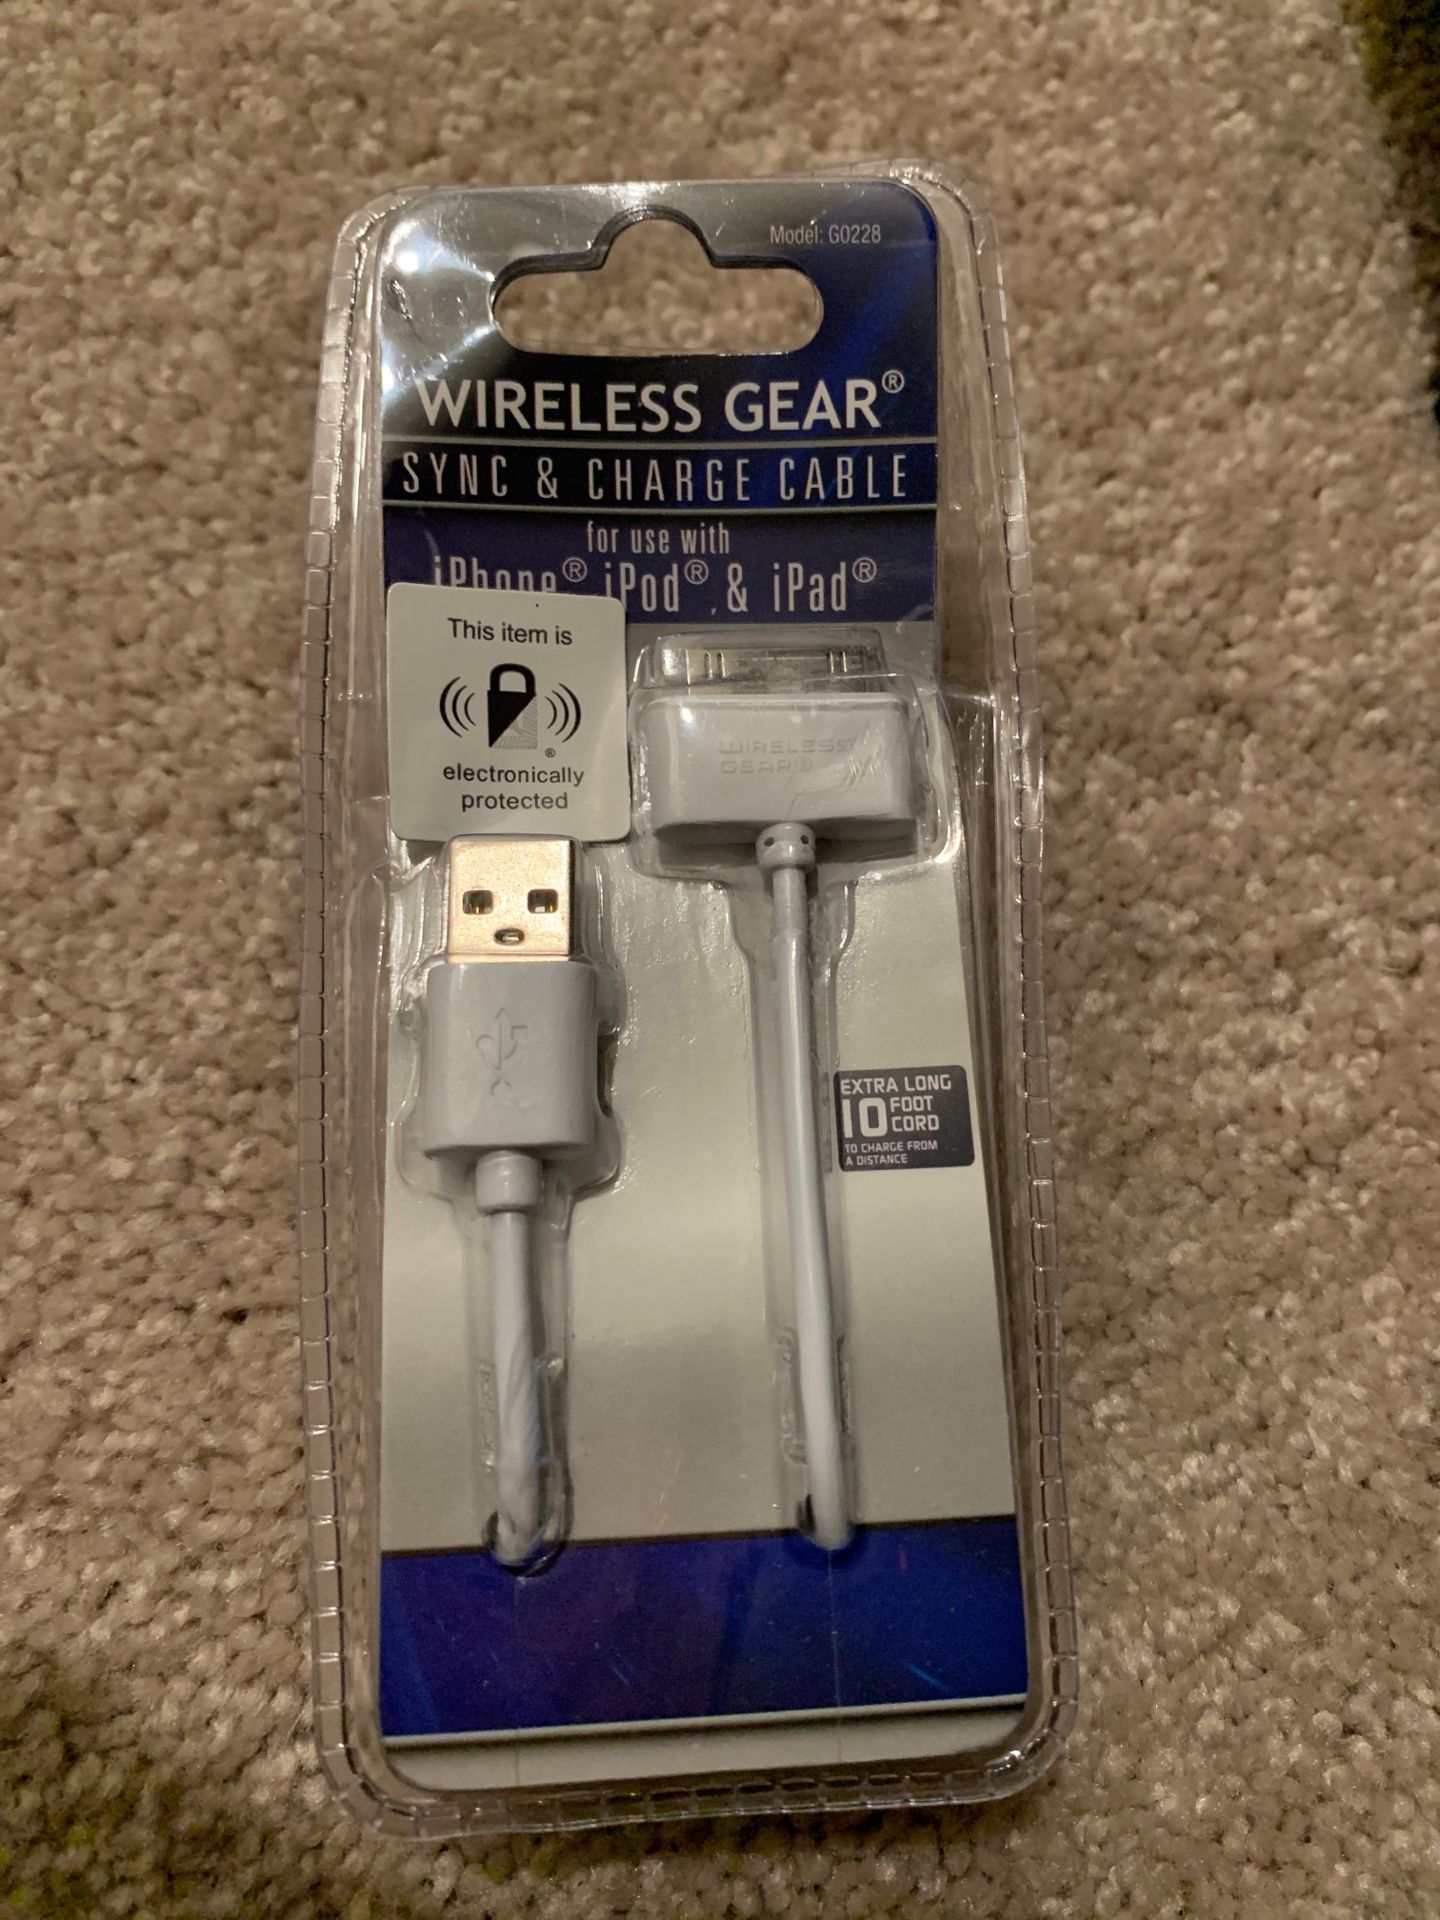 Wireless gear charger cables.